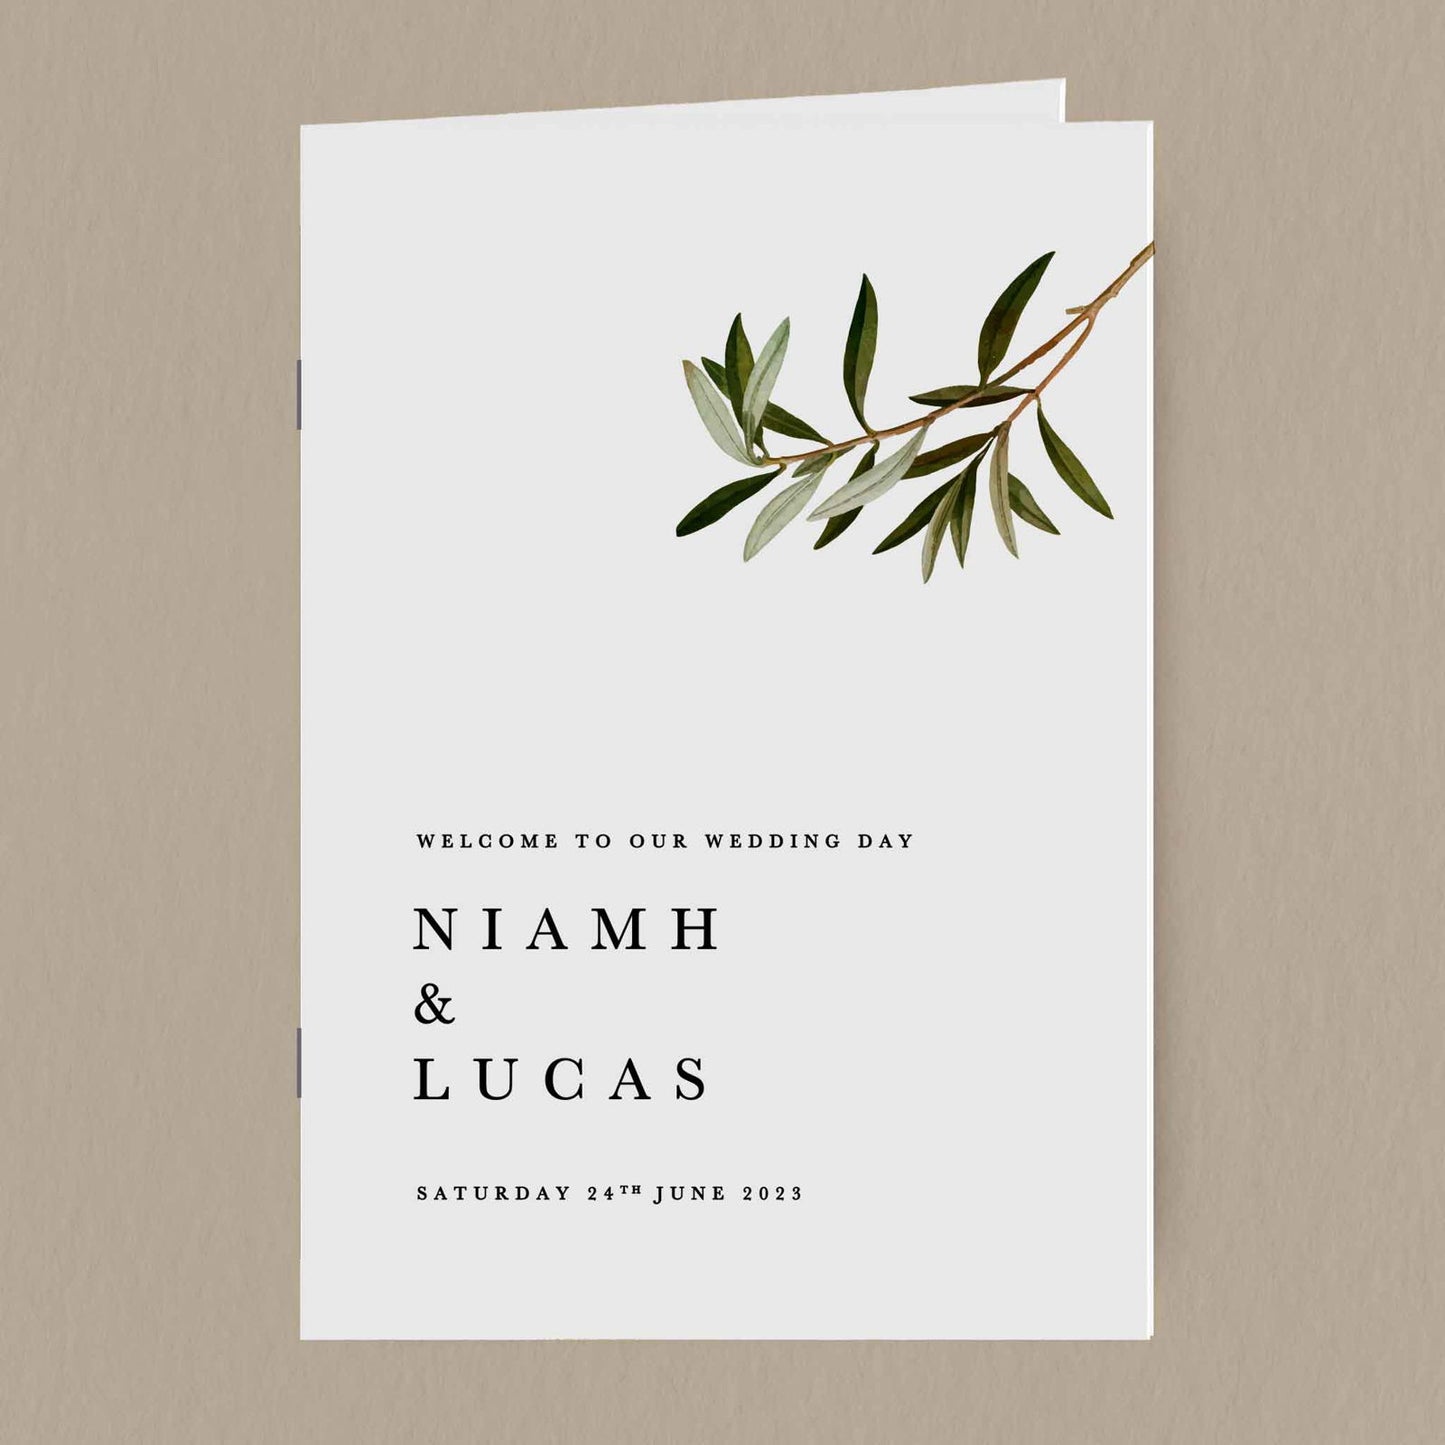 Niamh Order Of Service  Ivy and Gold Wedding Stationery   